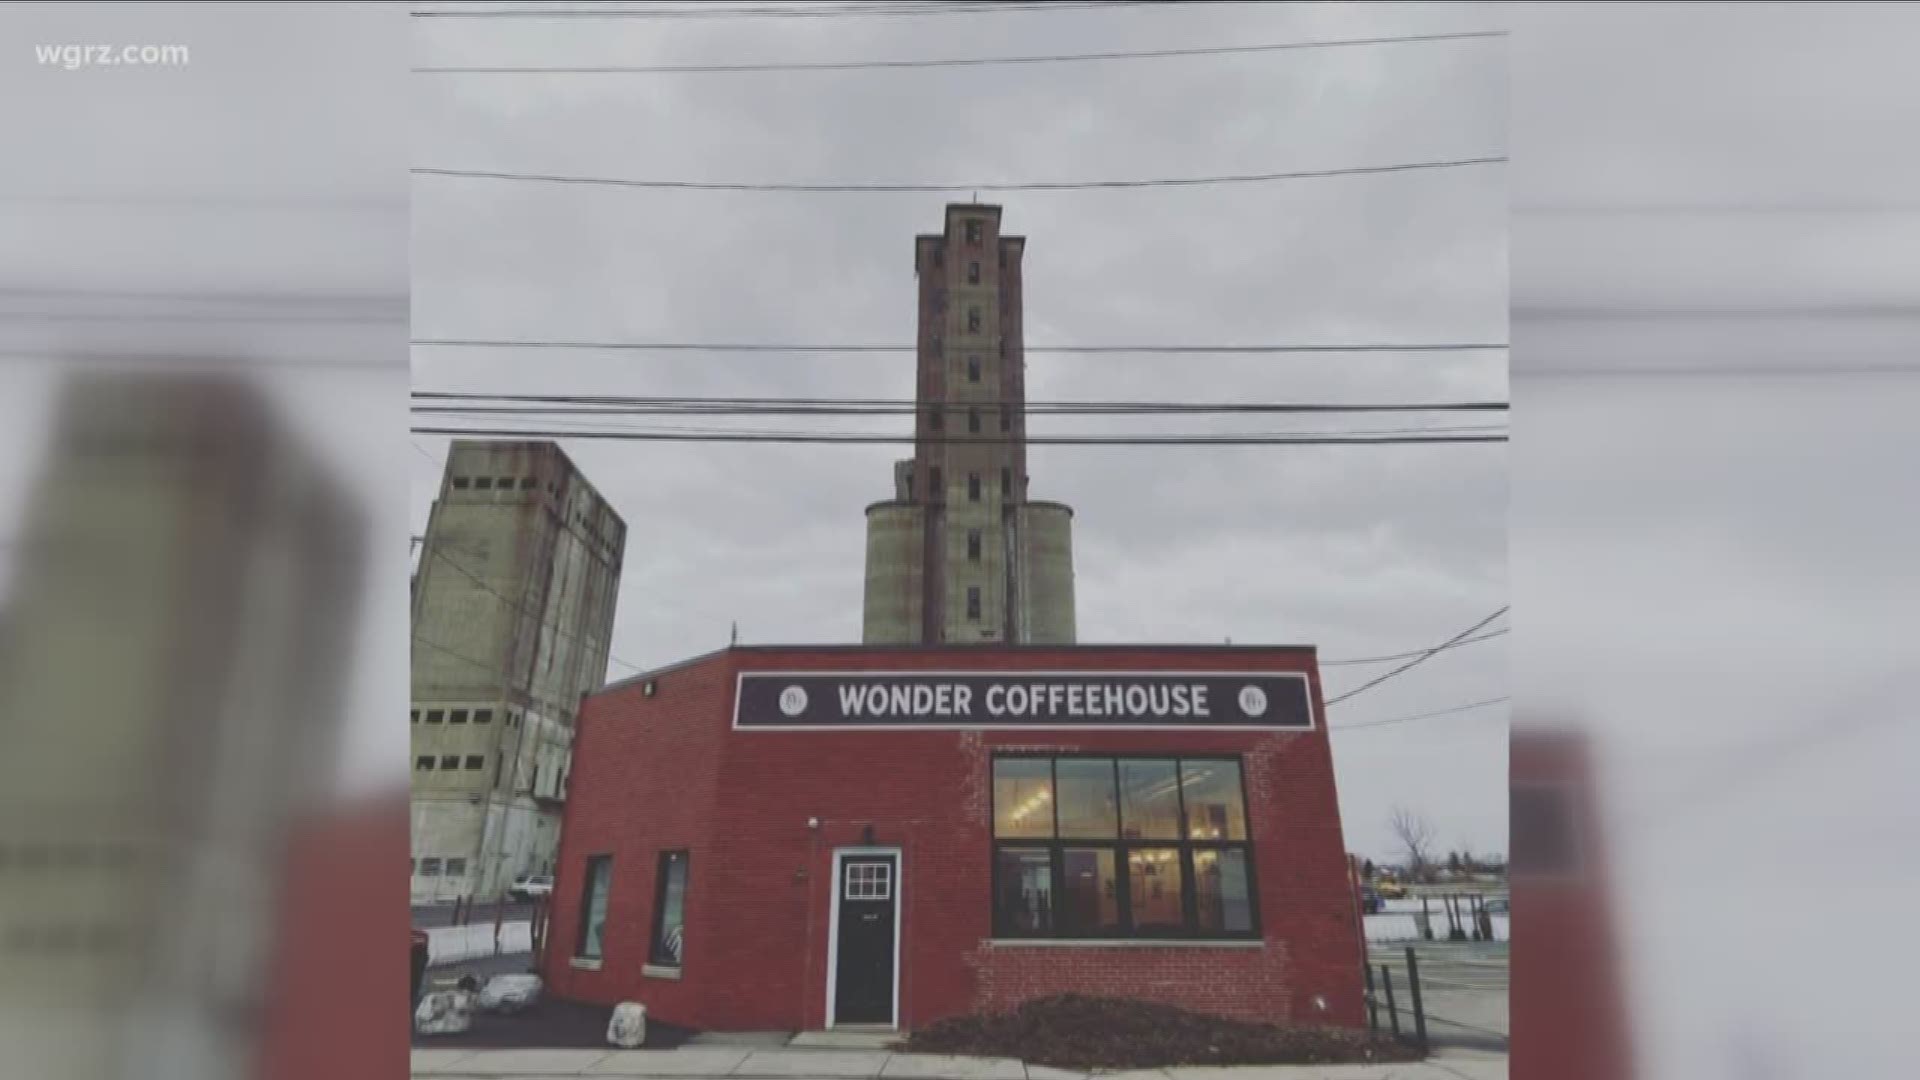 Exploring the new Wonder Coffeehouse